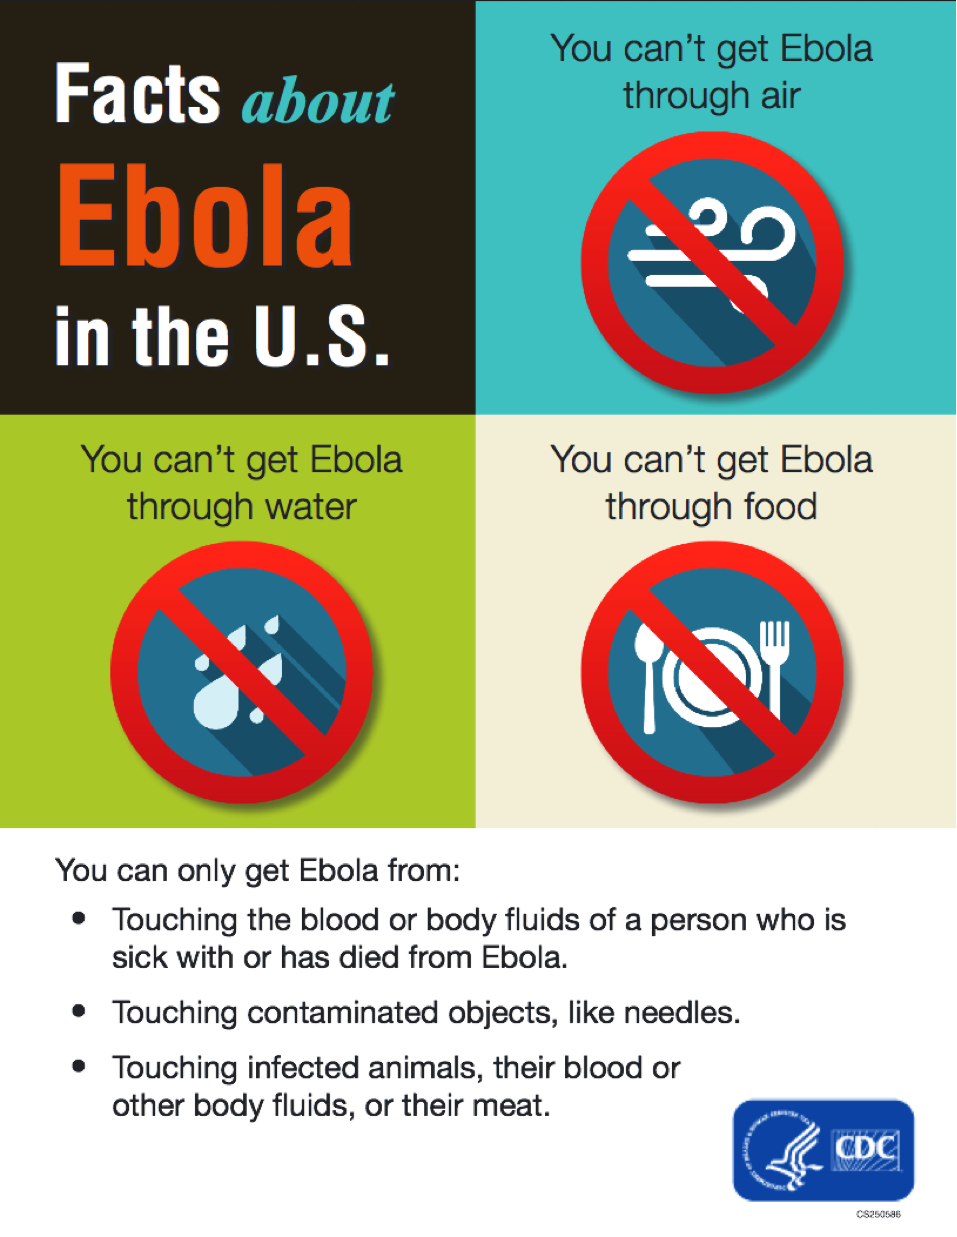 http://safety.louisiana.edu/sites/safety/files/ebola2.png